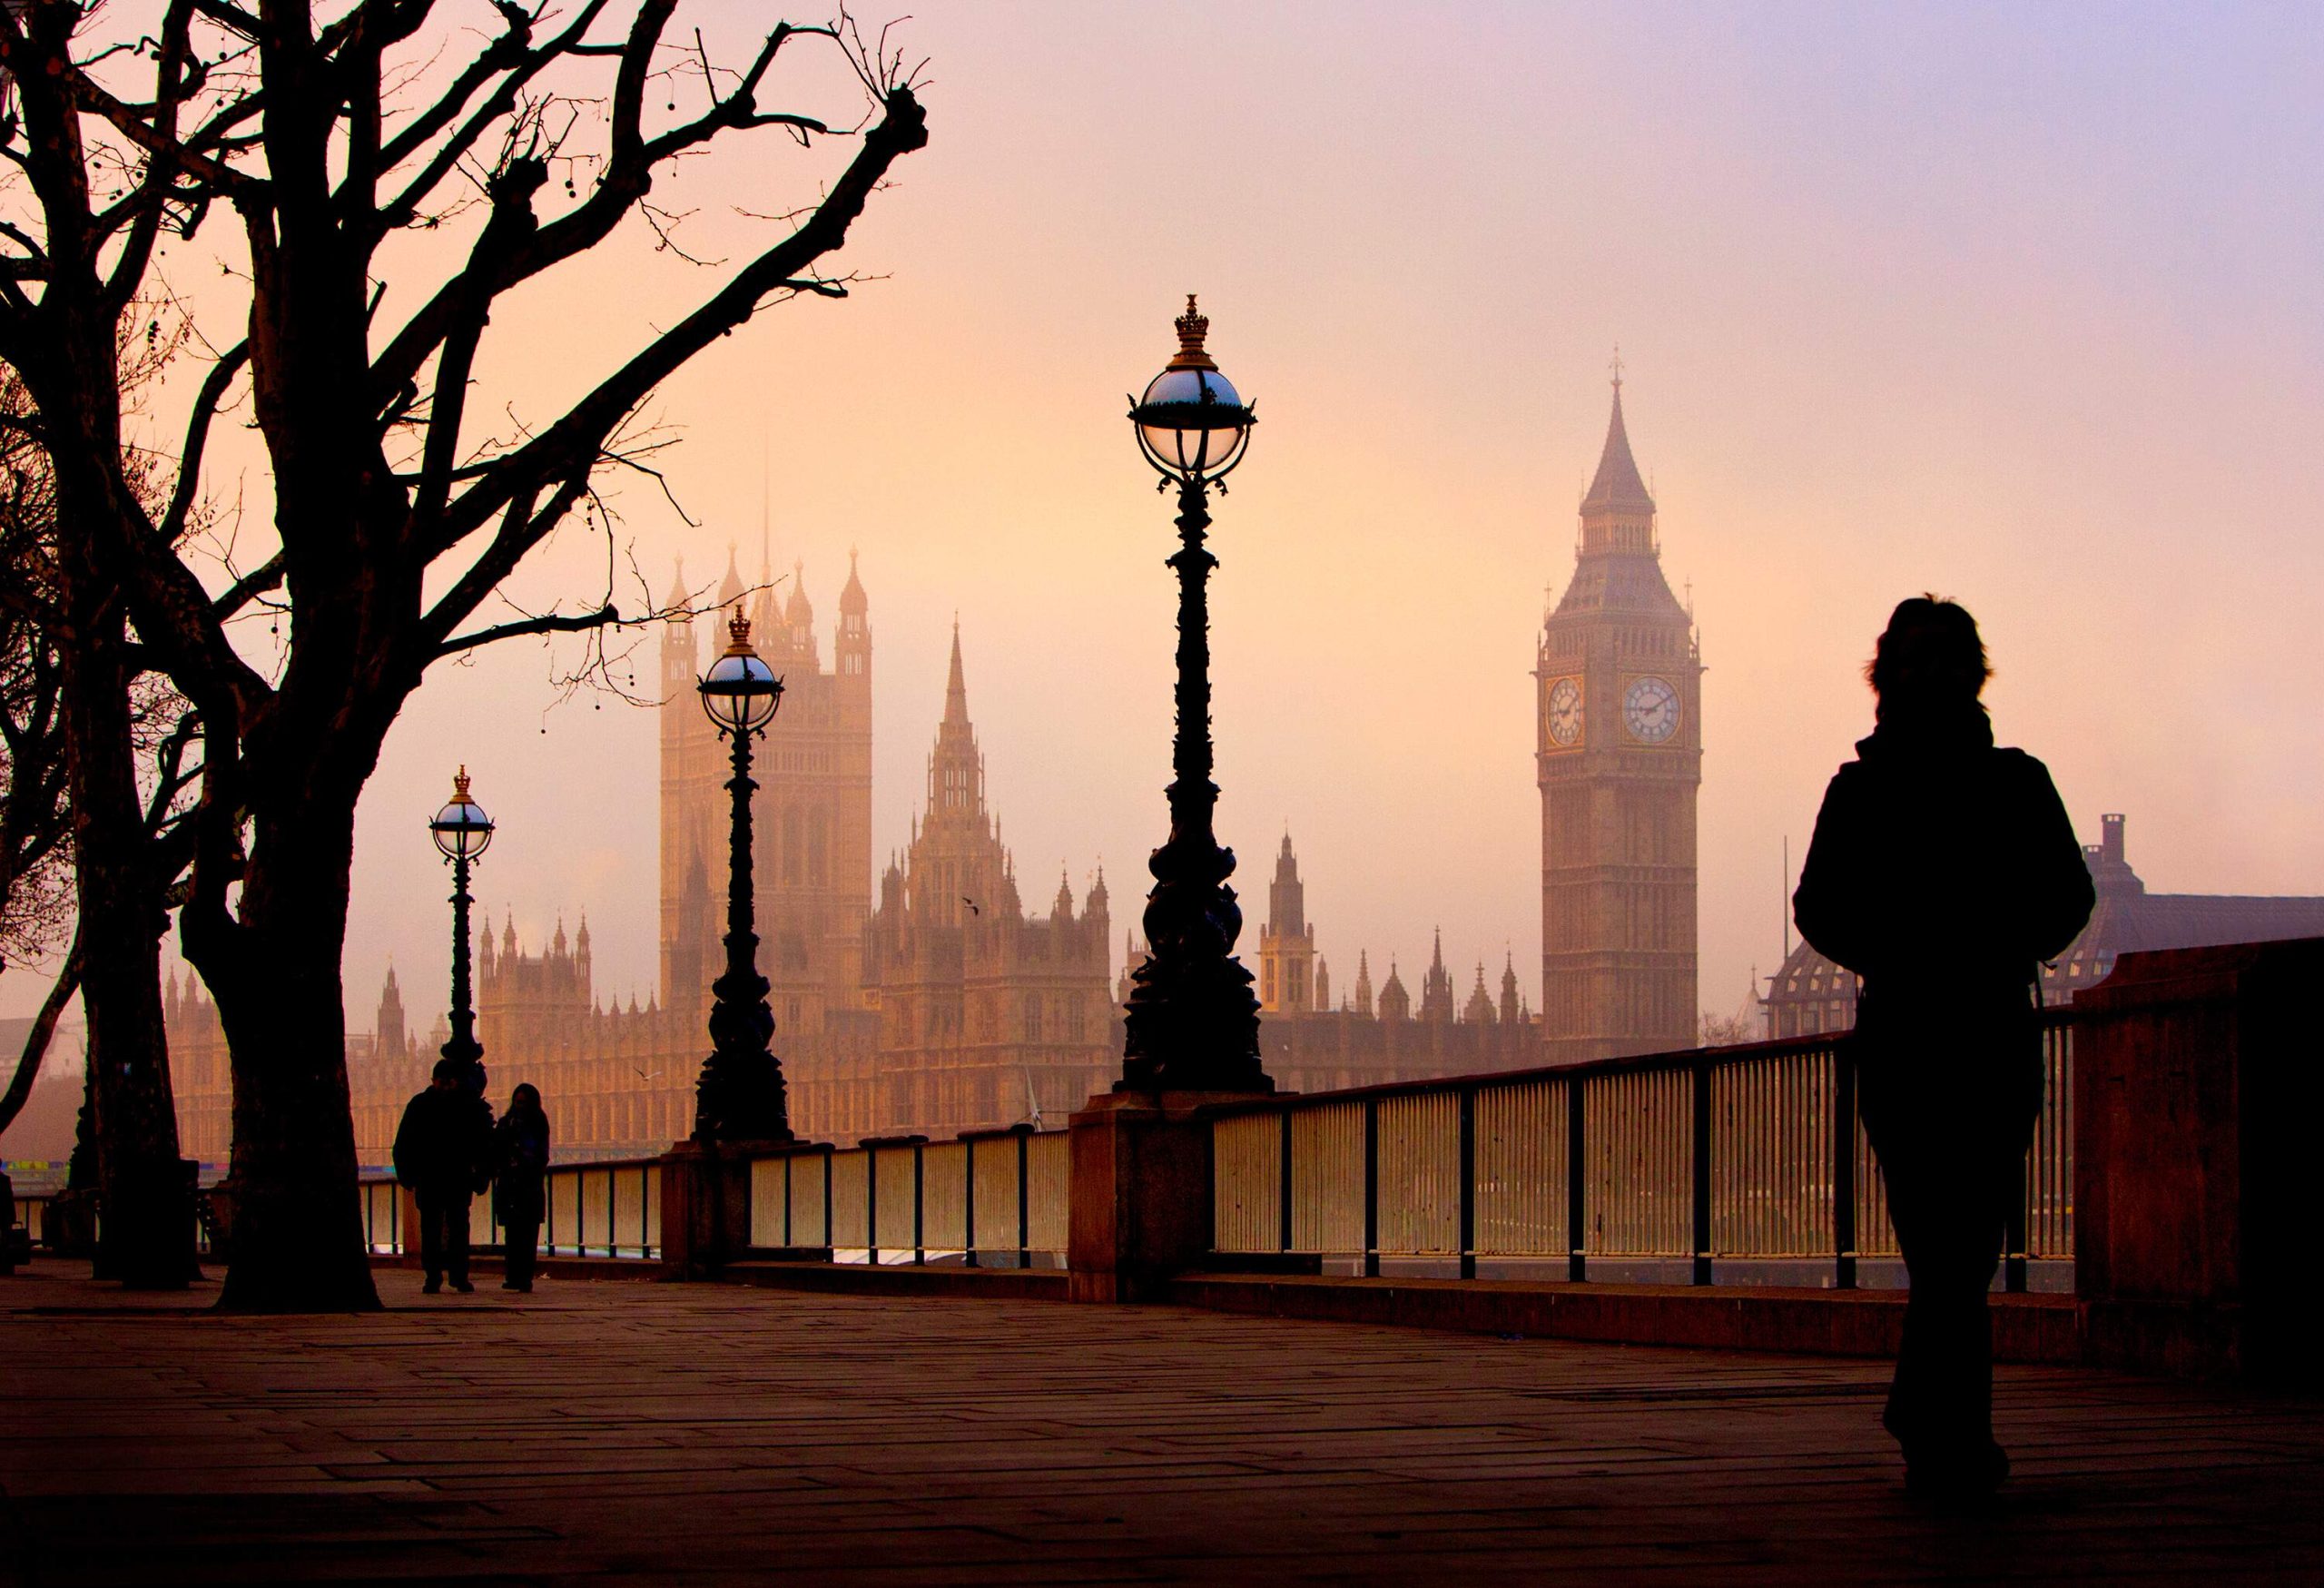 A woman's silhouette with some other tourist on a promenade lined with trees and street lights with a view of Big Ben's clock tower and the Palace of Westminster. 